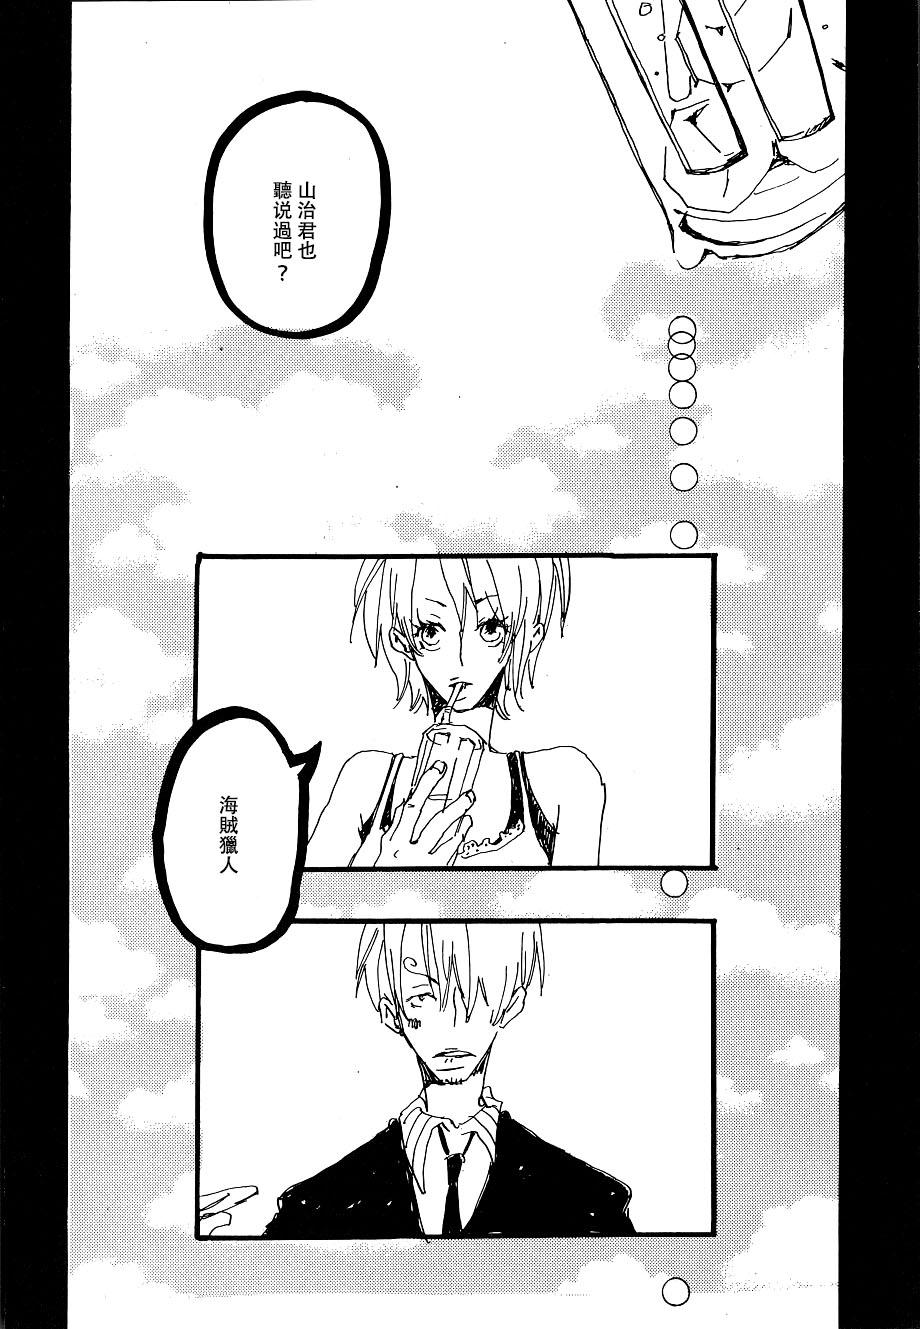 Chile Heliotrope |日光菊 - One piece Lolicon - Page 7